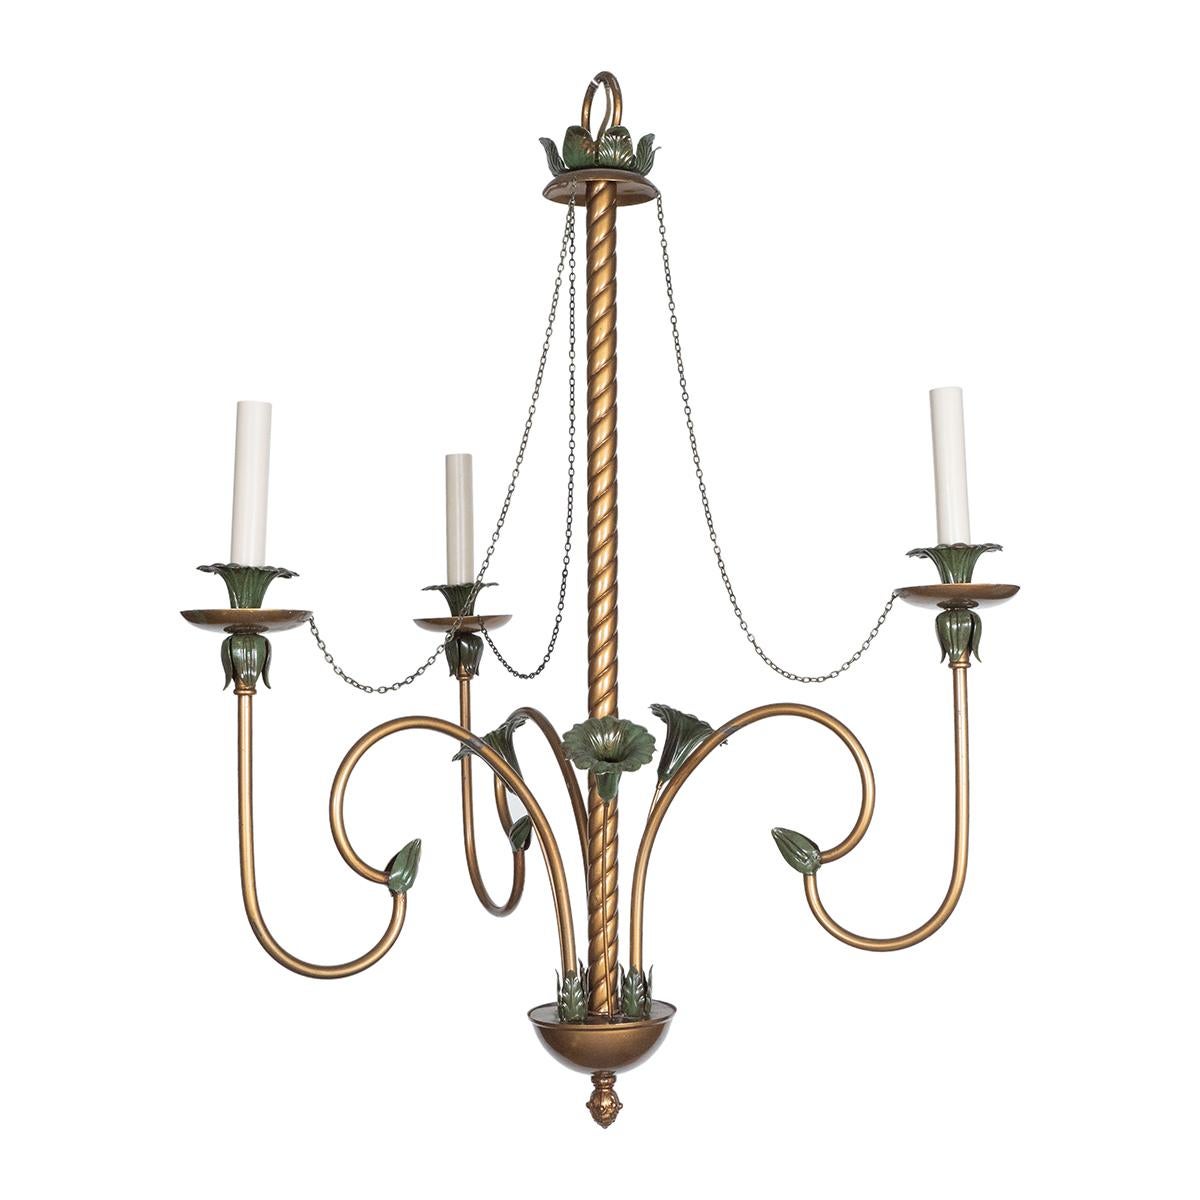 Curvilinear chandelier with gold painted metal finish featuring a verdigris floral motif.